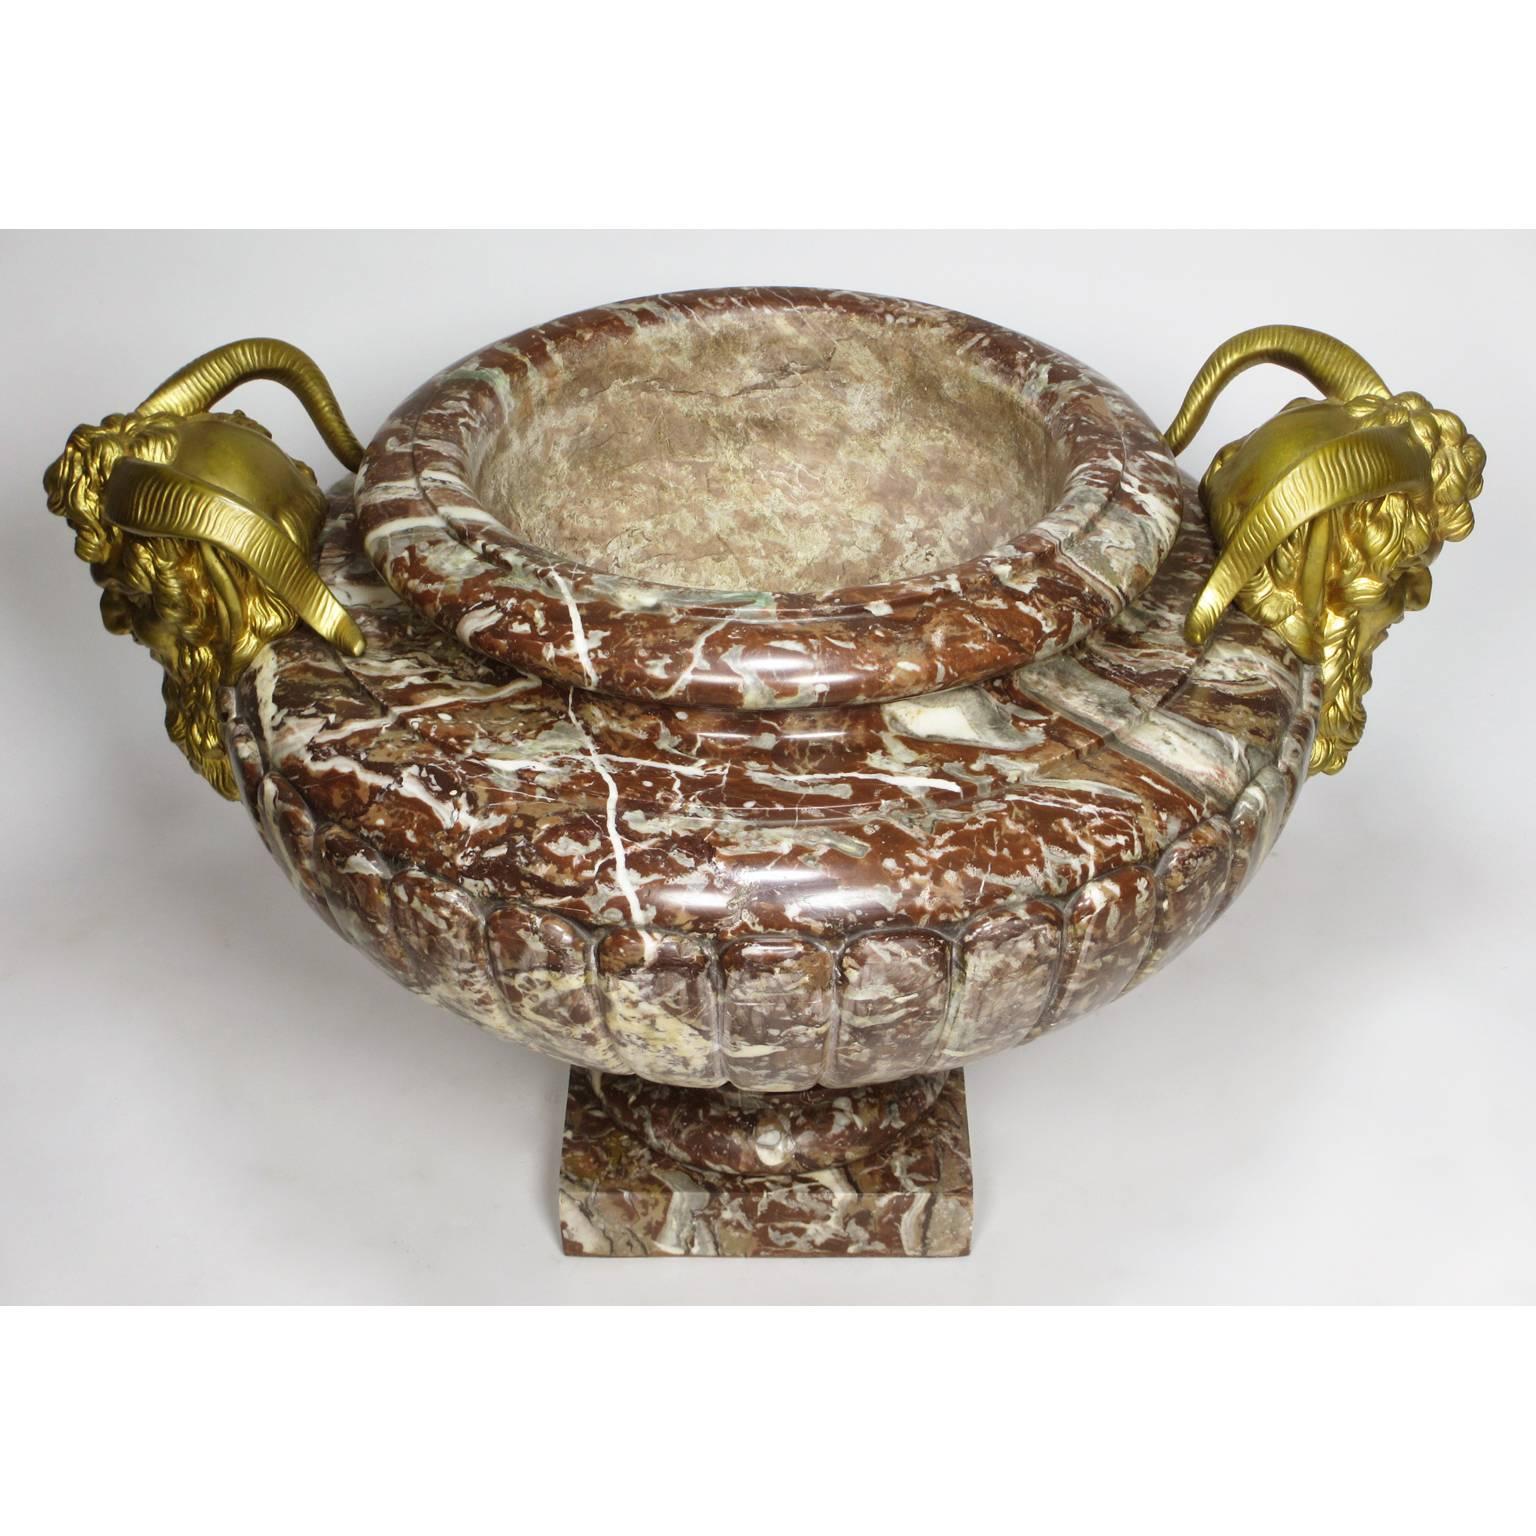 A very fine and large French 19th century Louis XV style carved Rouge-Royal marble and figural gilt bronze-mounted planter-urn, surmounted with a pair of gilt bronze masks of a Satyr, Paris, circa 1880.

Height 17 1/2 inches (44.5 cm).
Width 27